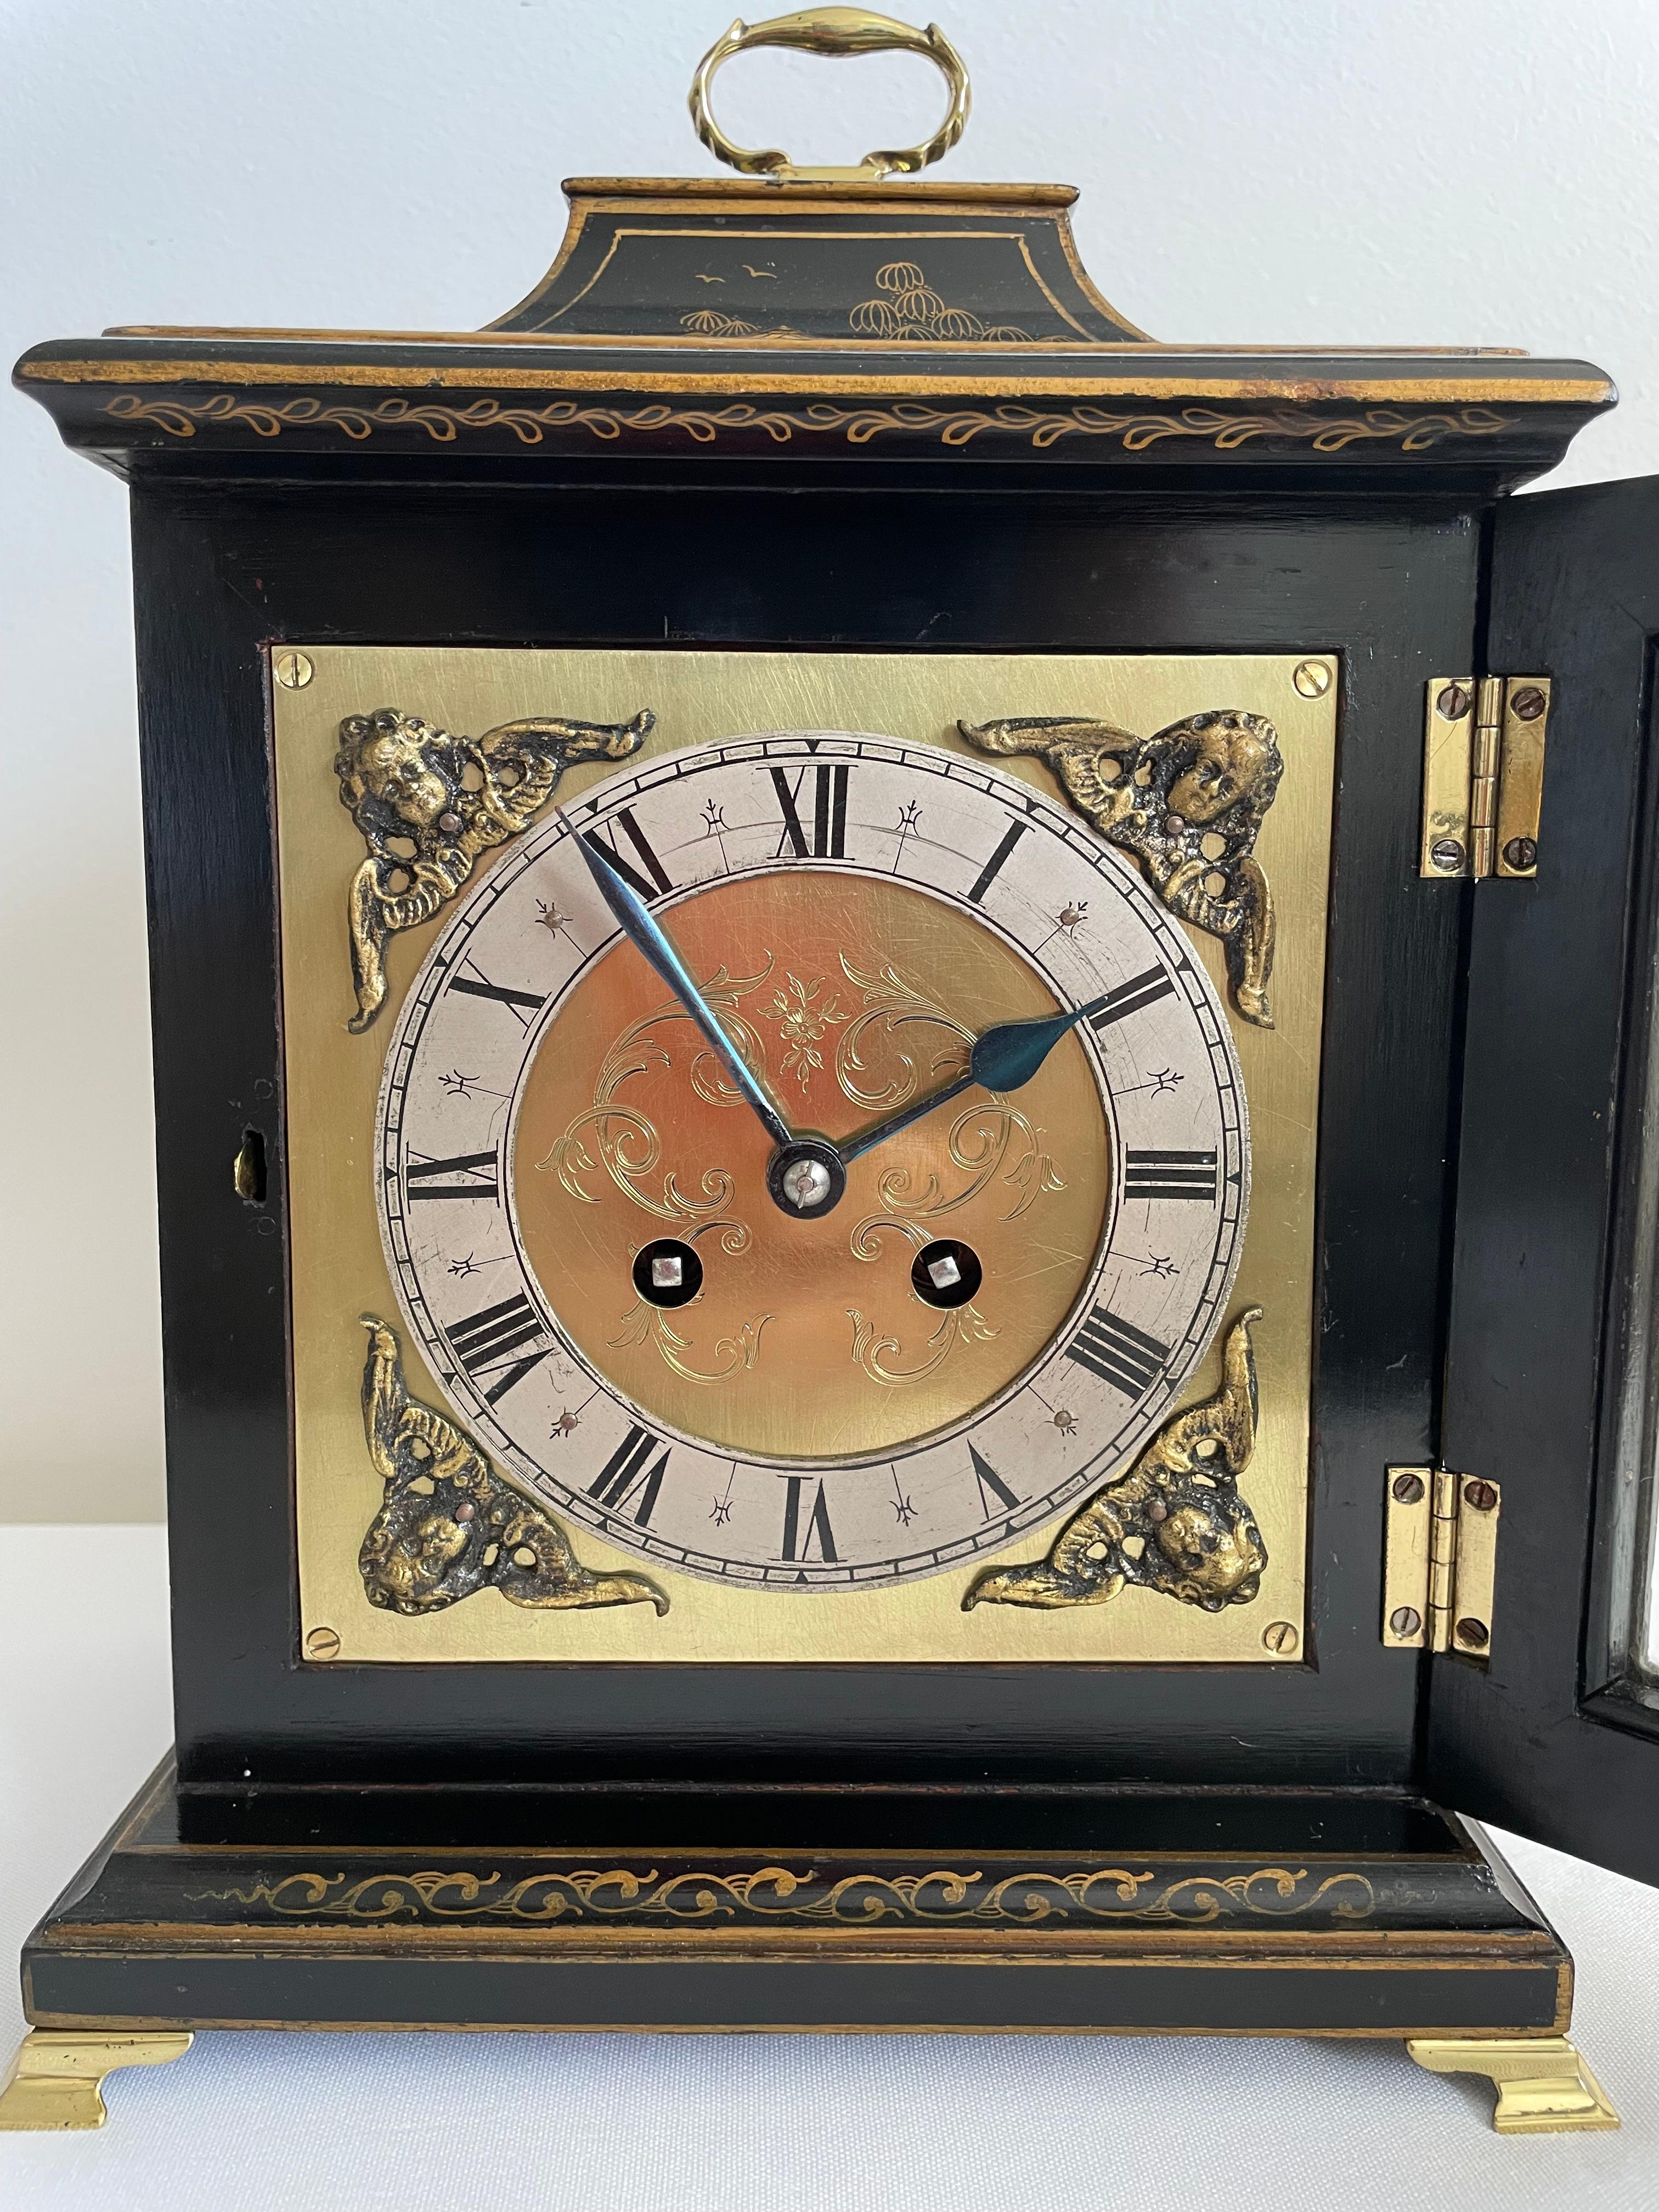 Black Chinoiserie Mantel Clock In Georgian Style, French Movement, Circa 1930 In Good Condition For Sale In Melbourne, Victoria